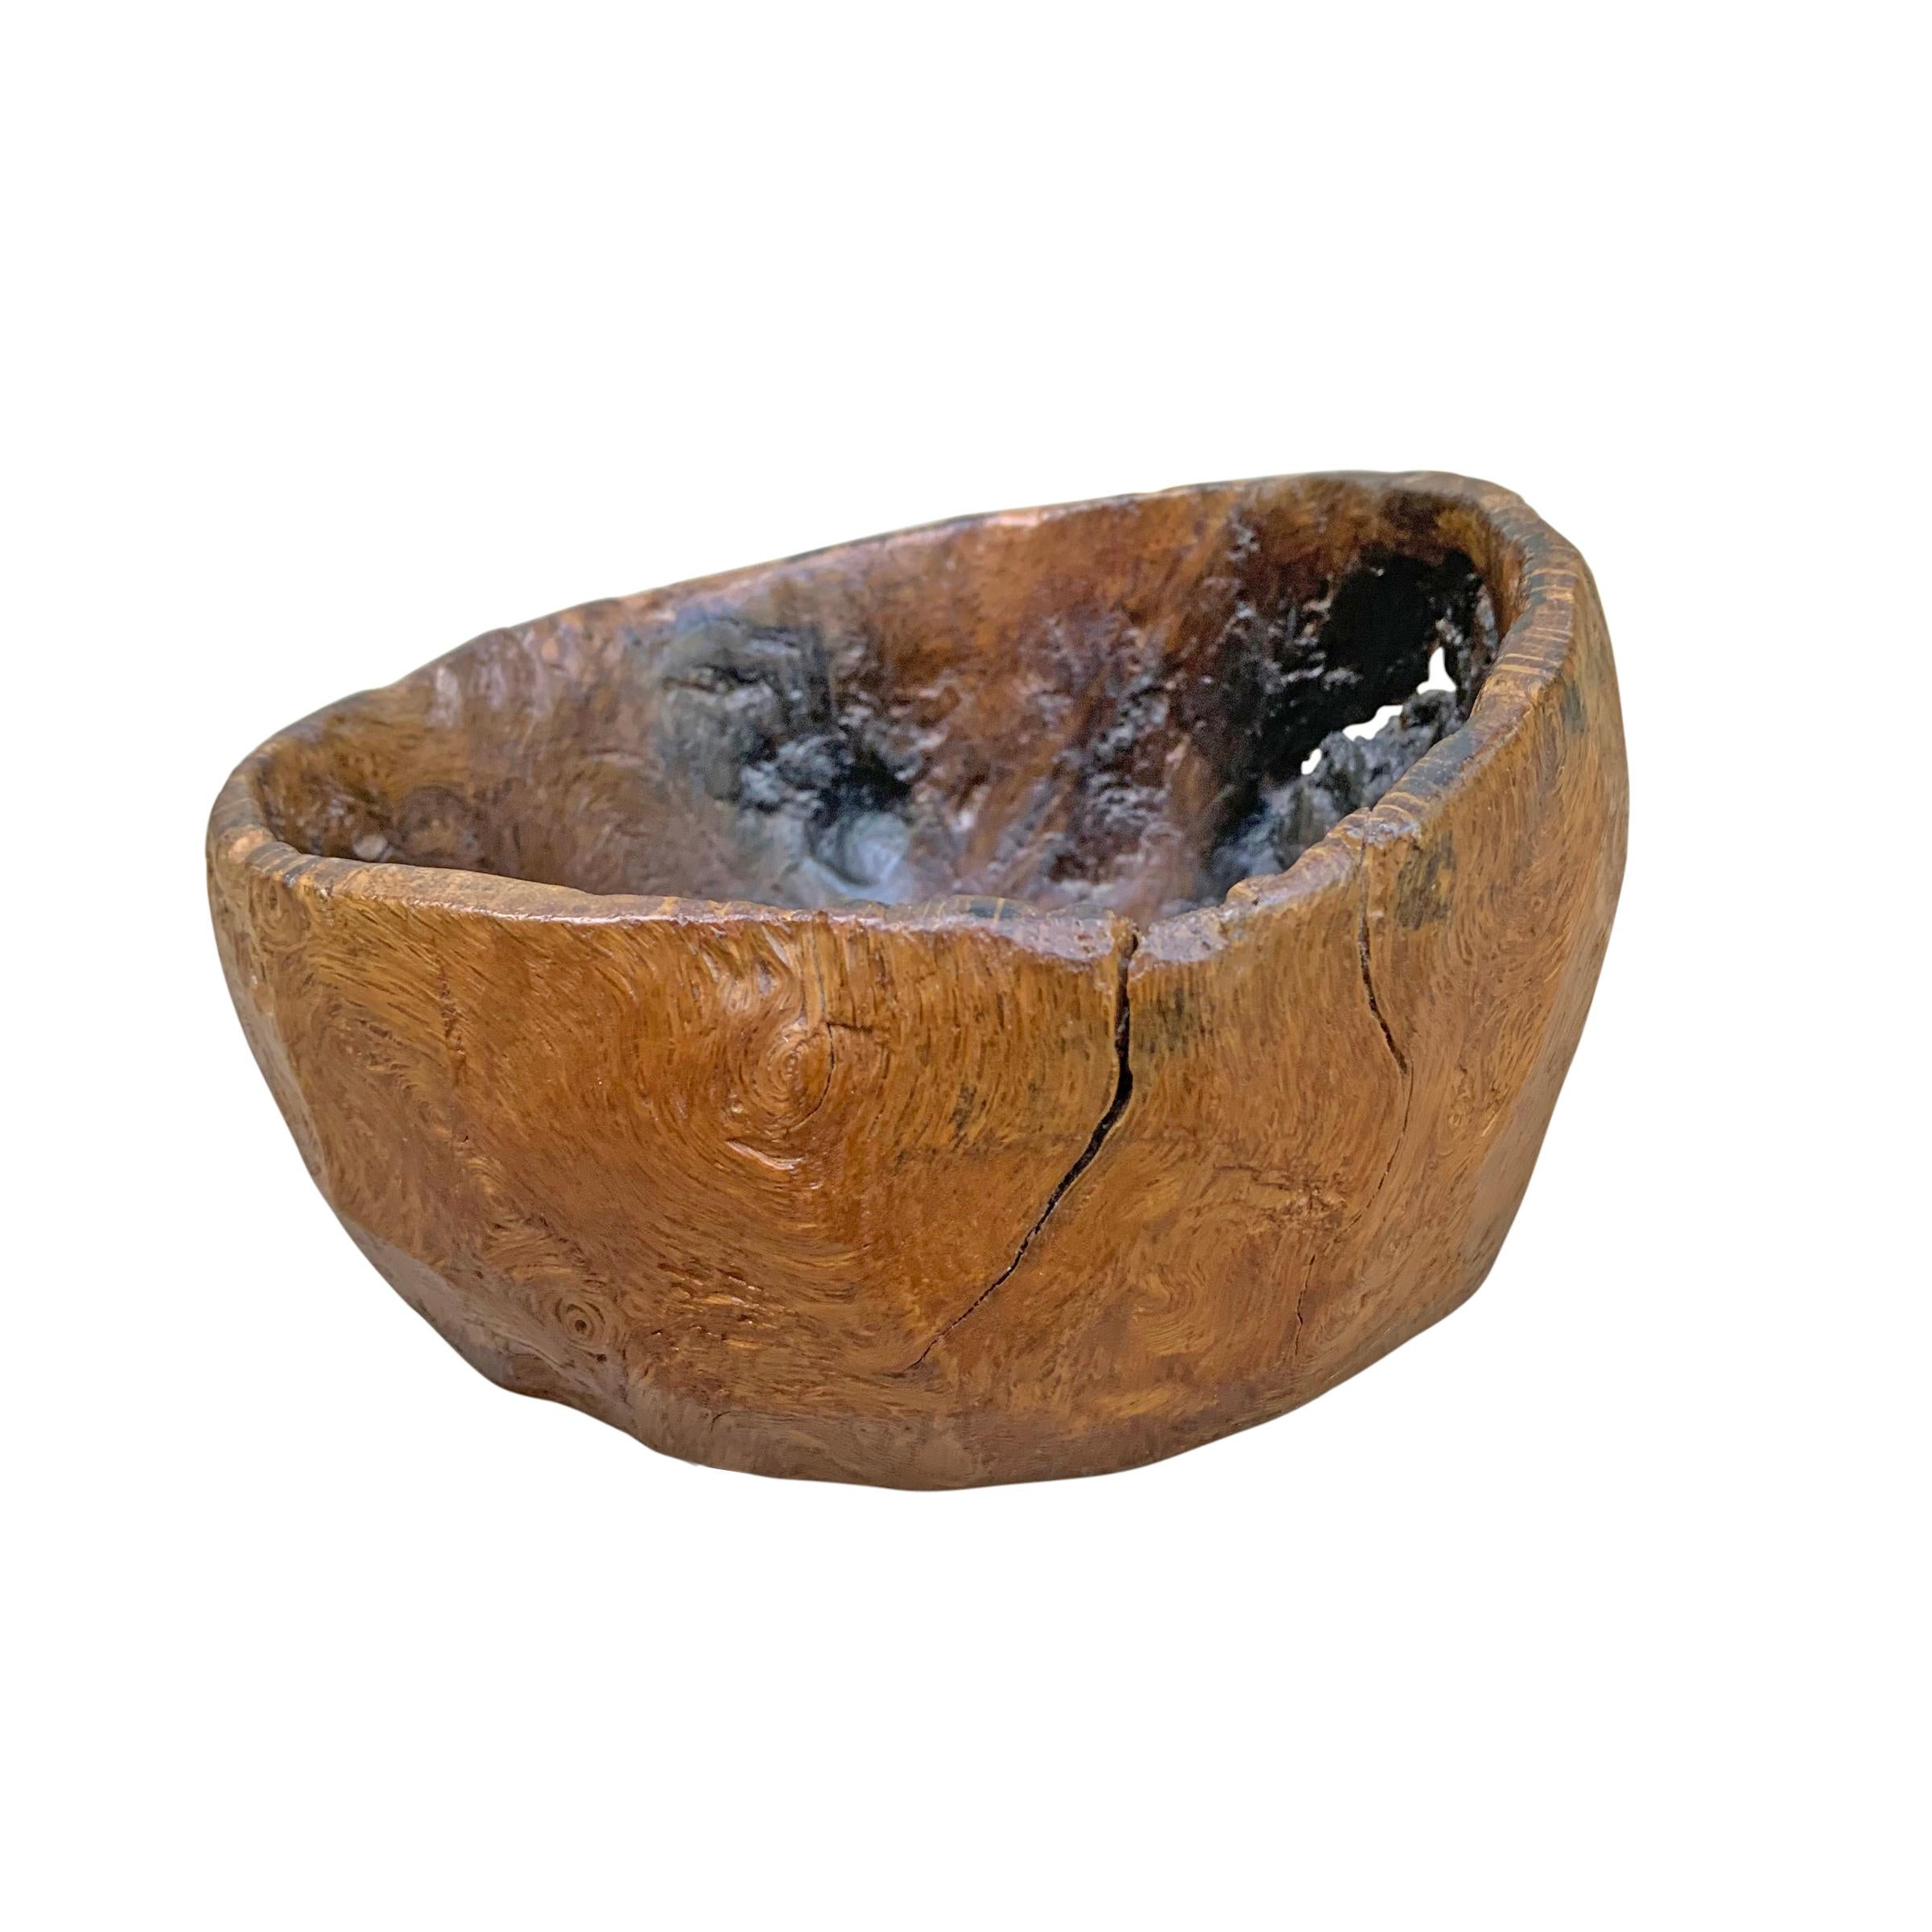 A beautiful 19th century American hand carved burl wood bowl with a fantastic swirling wood grain pattern and wonderful patina. Perfect on its own, or filled with snacks at your next party.